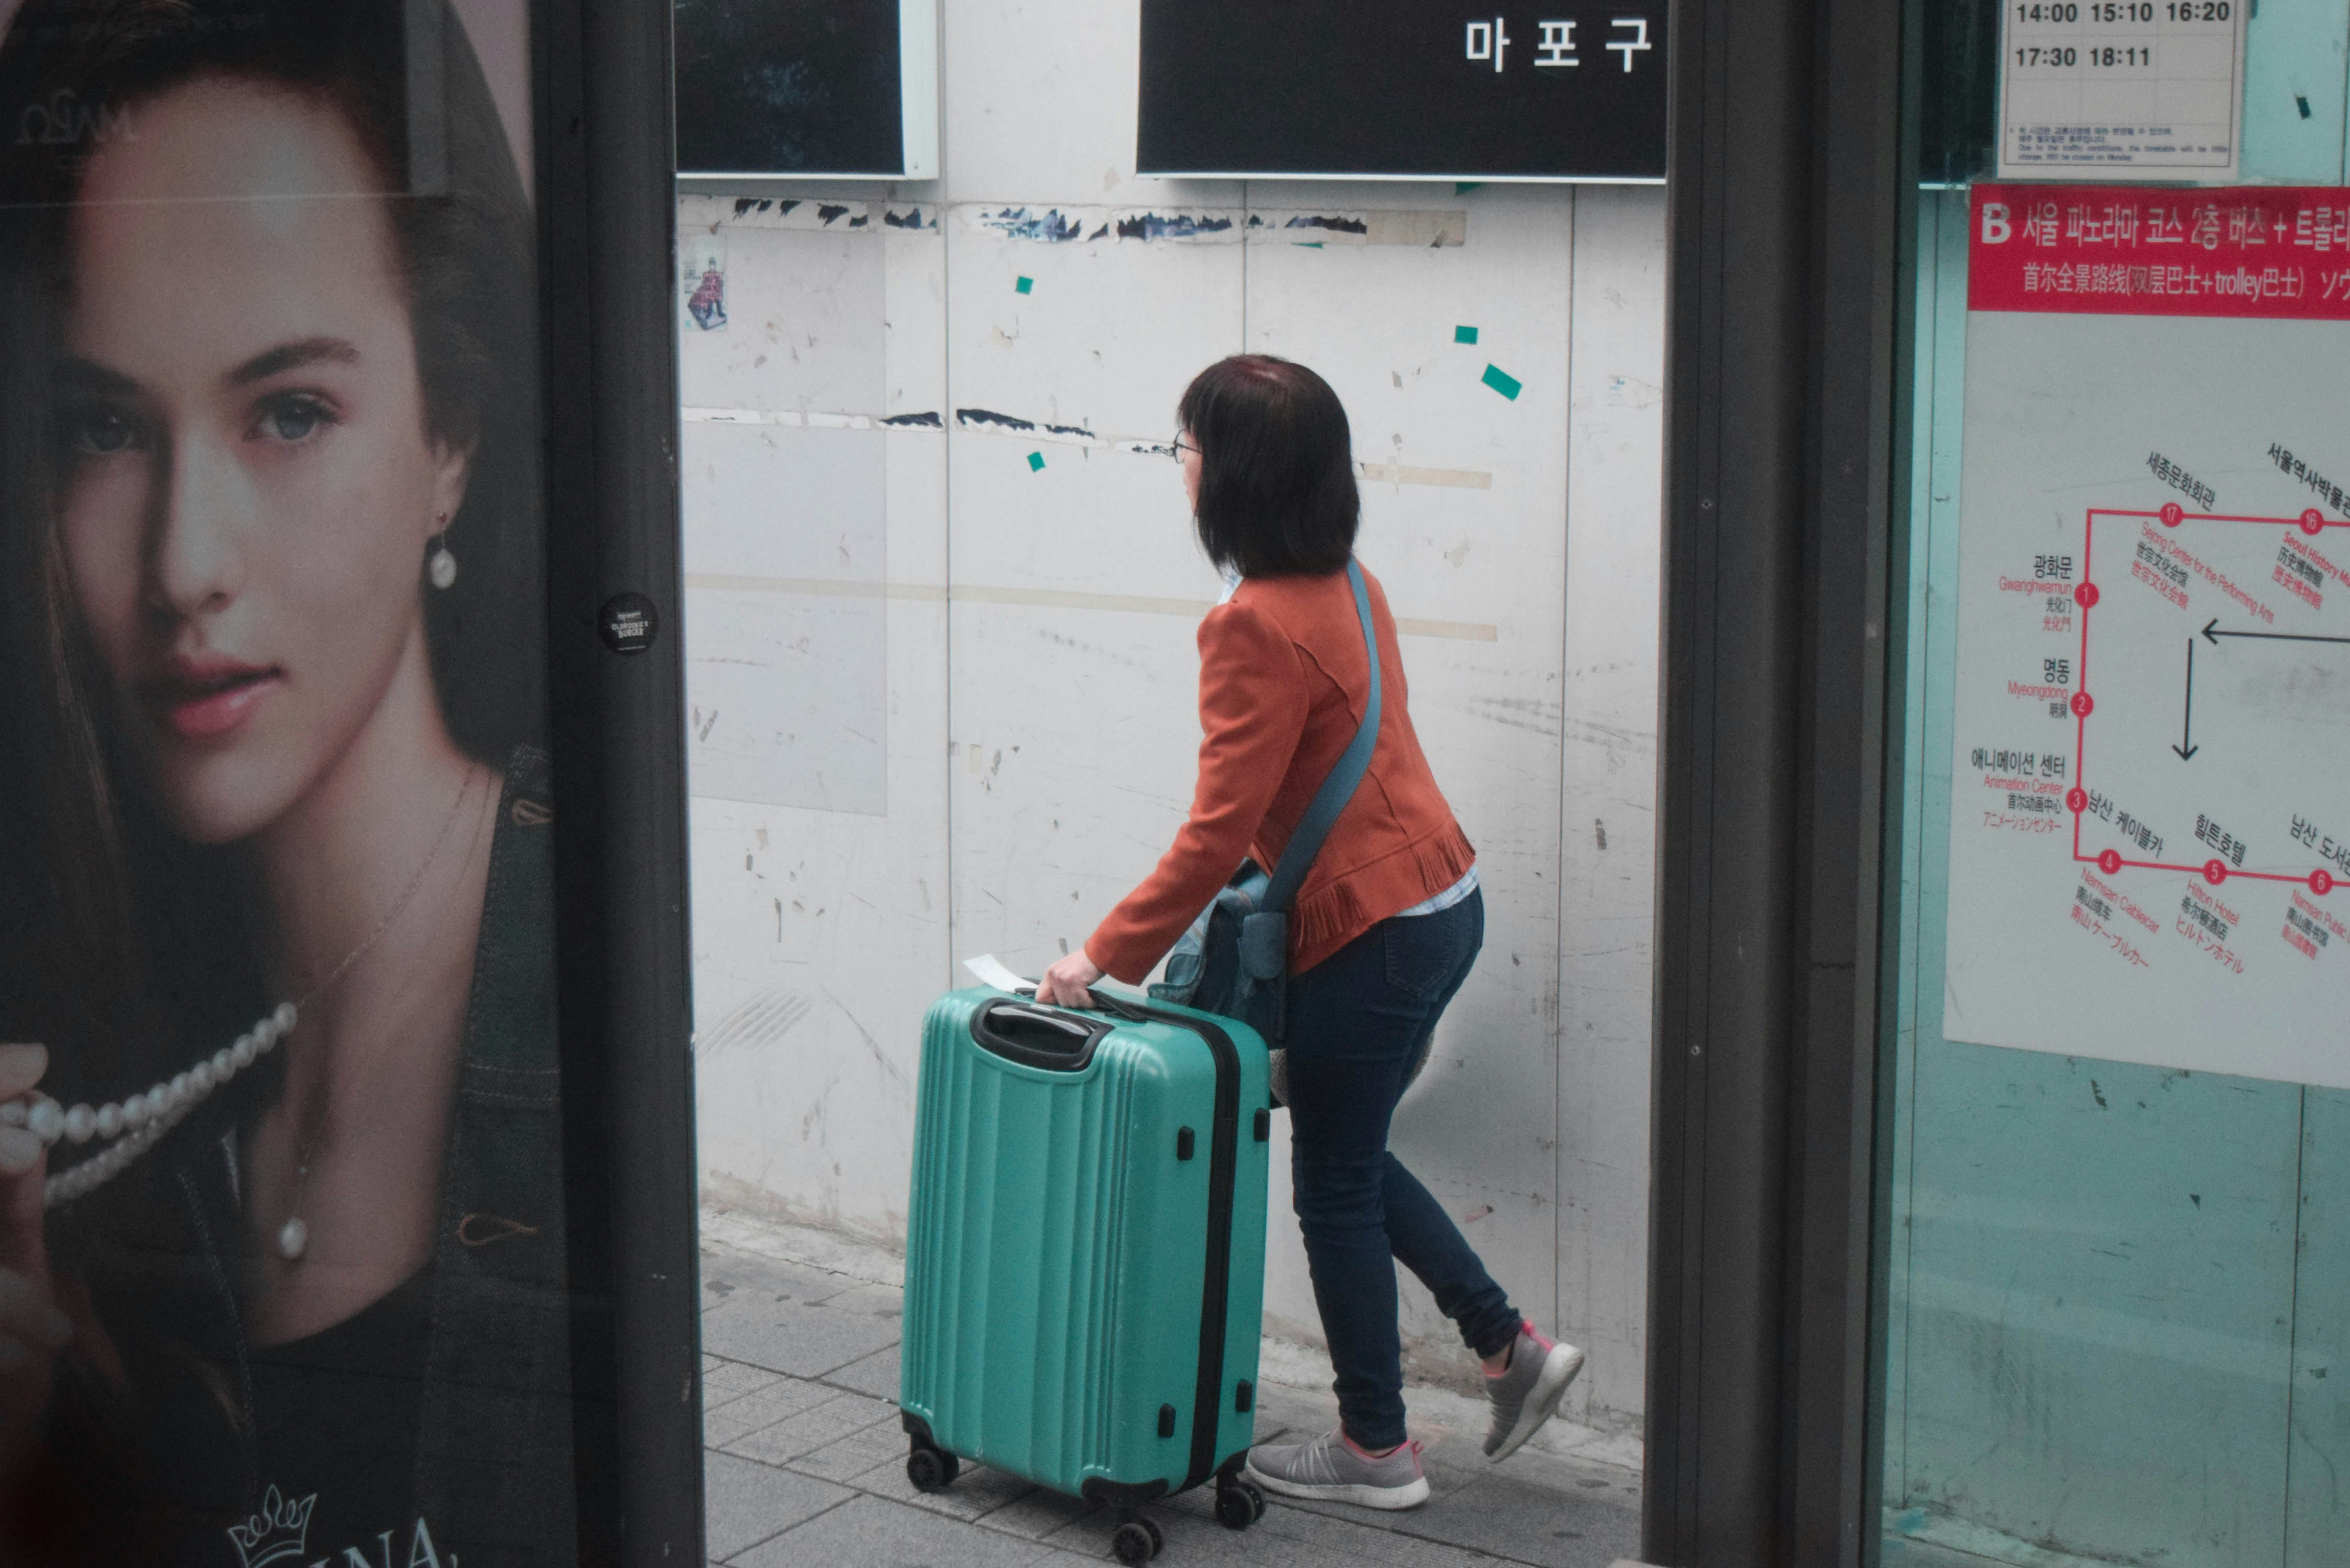 A tourist (?) rushes with her trolley bag